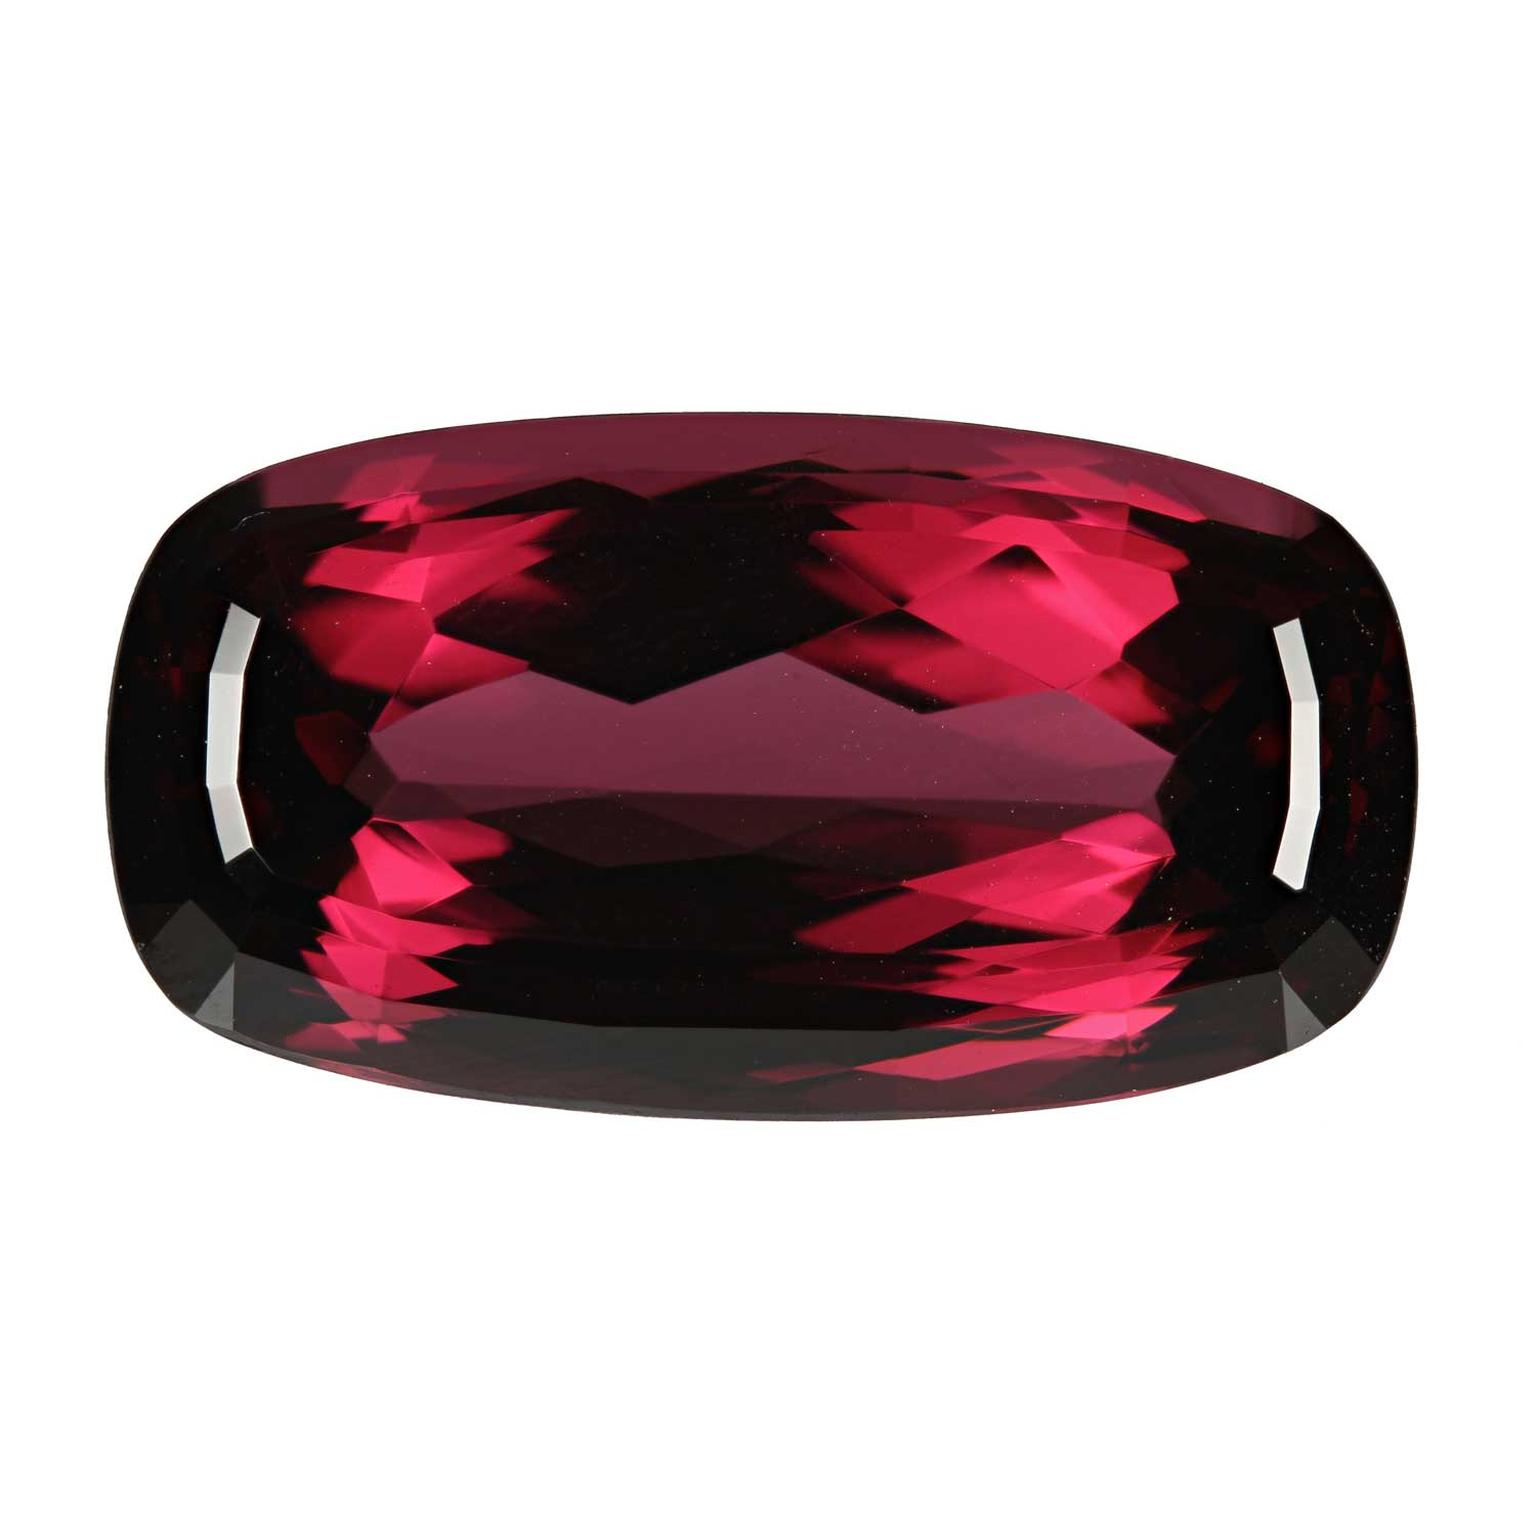 Hermann Lind faceted rhodolite in a rich red colour